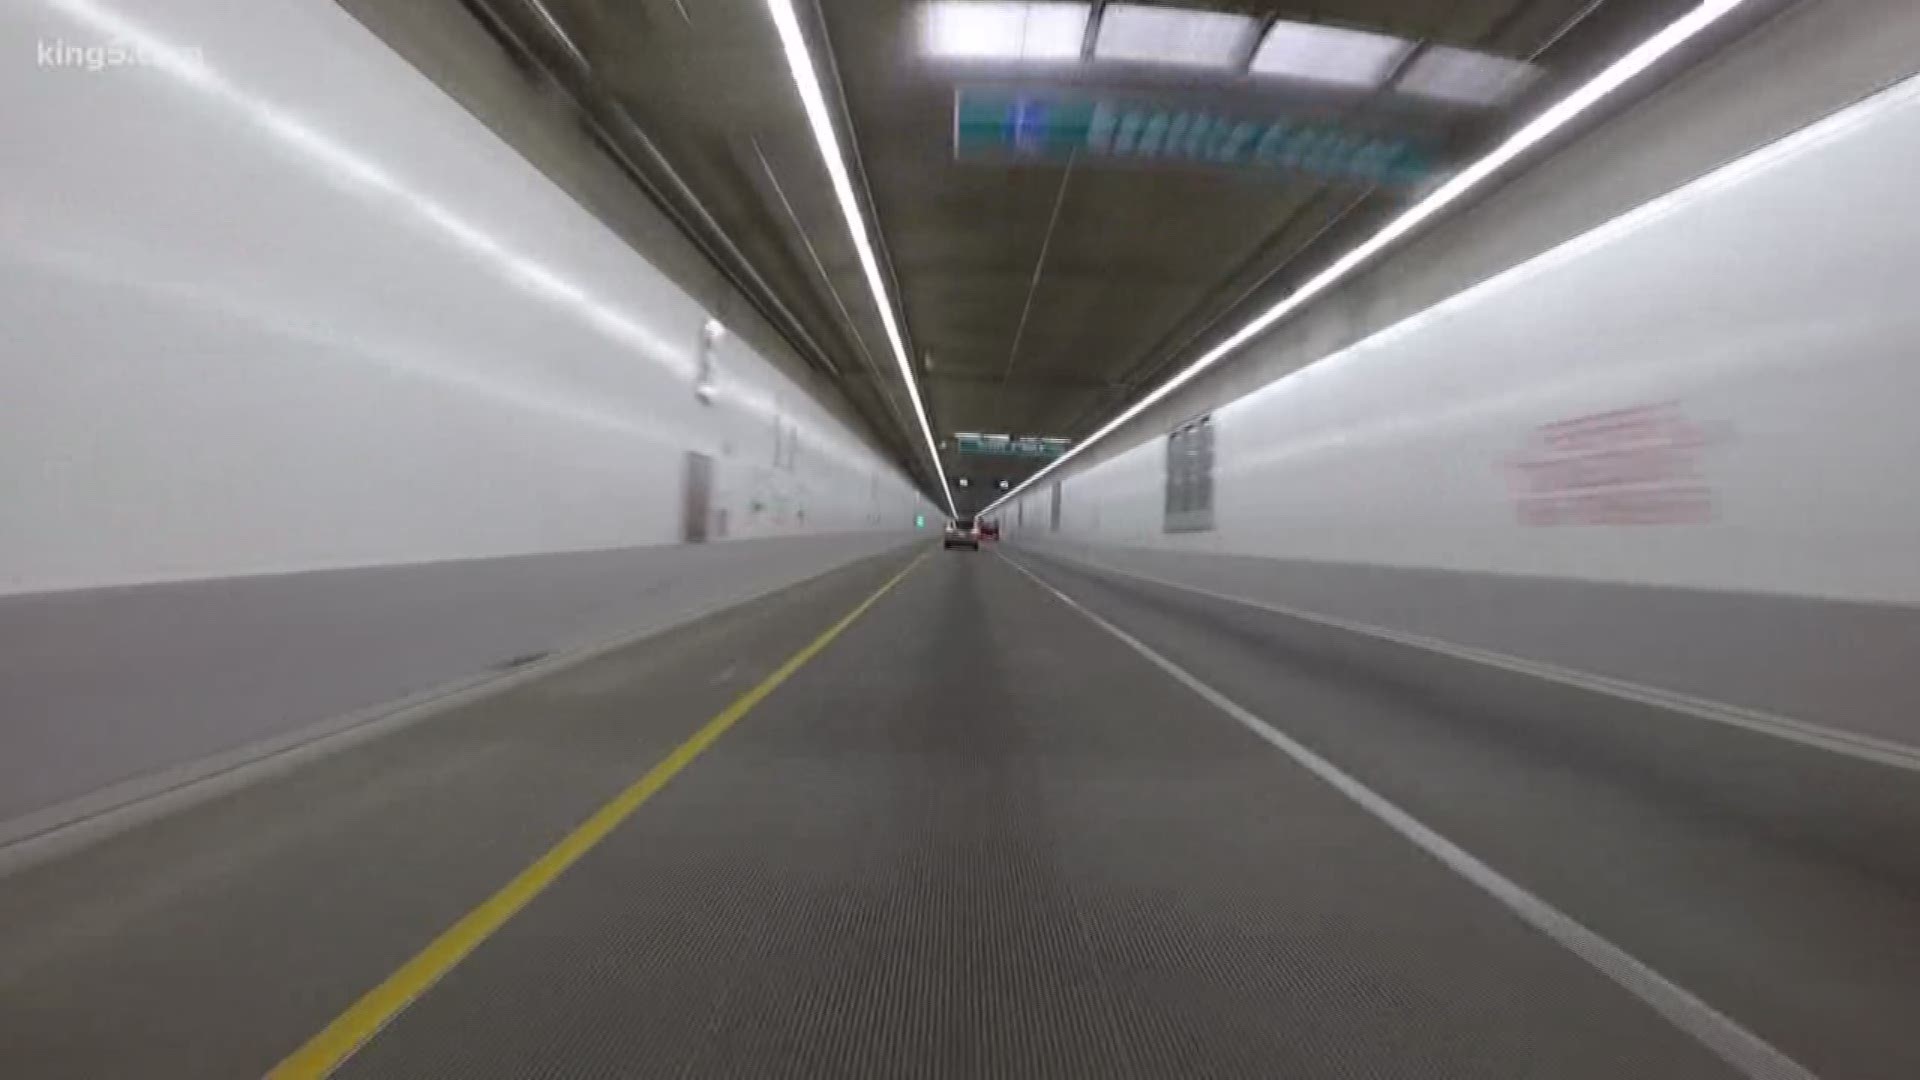 The SR 99 tunnel will be tolled beginning this Saturday. Drivers will be charged between $1 and $2.25 depending on the time of day.